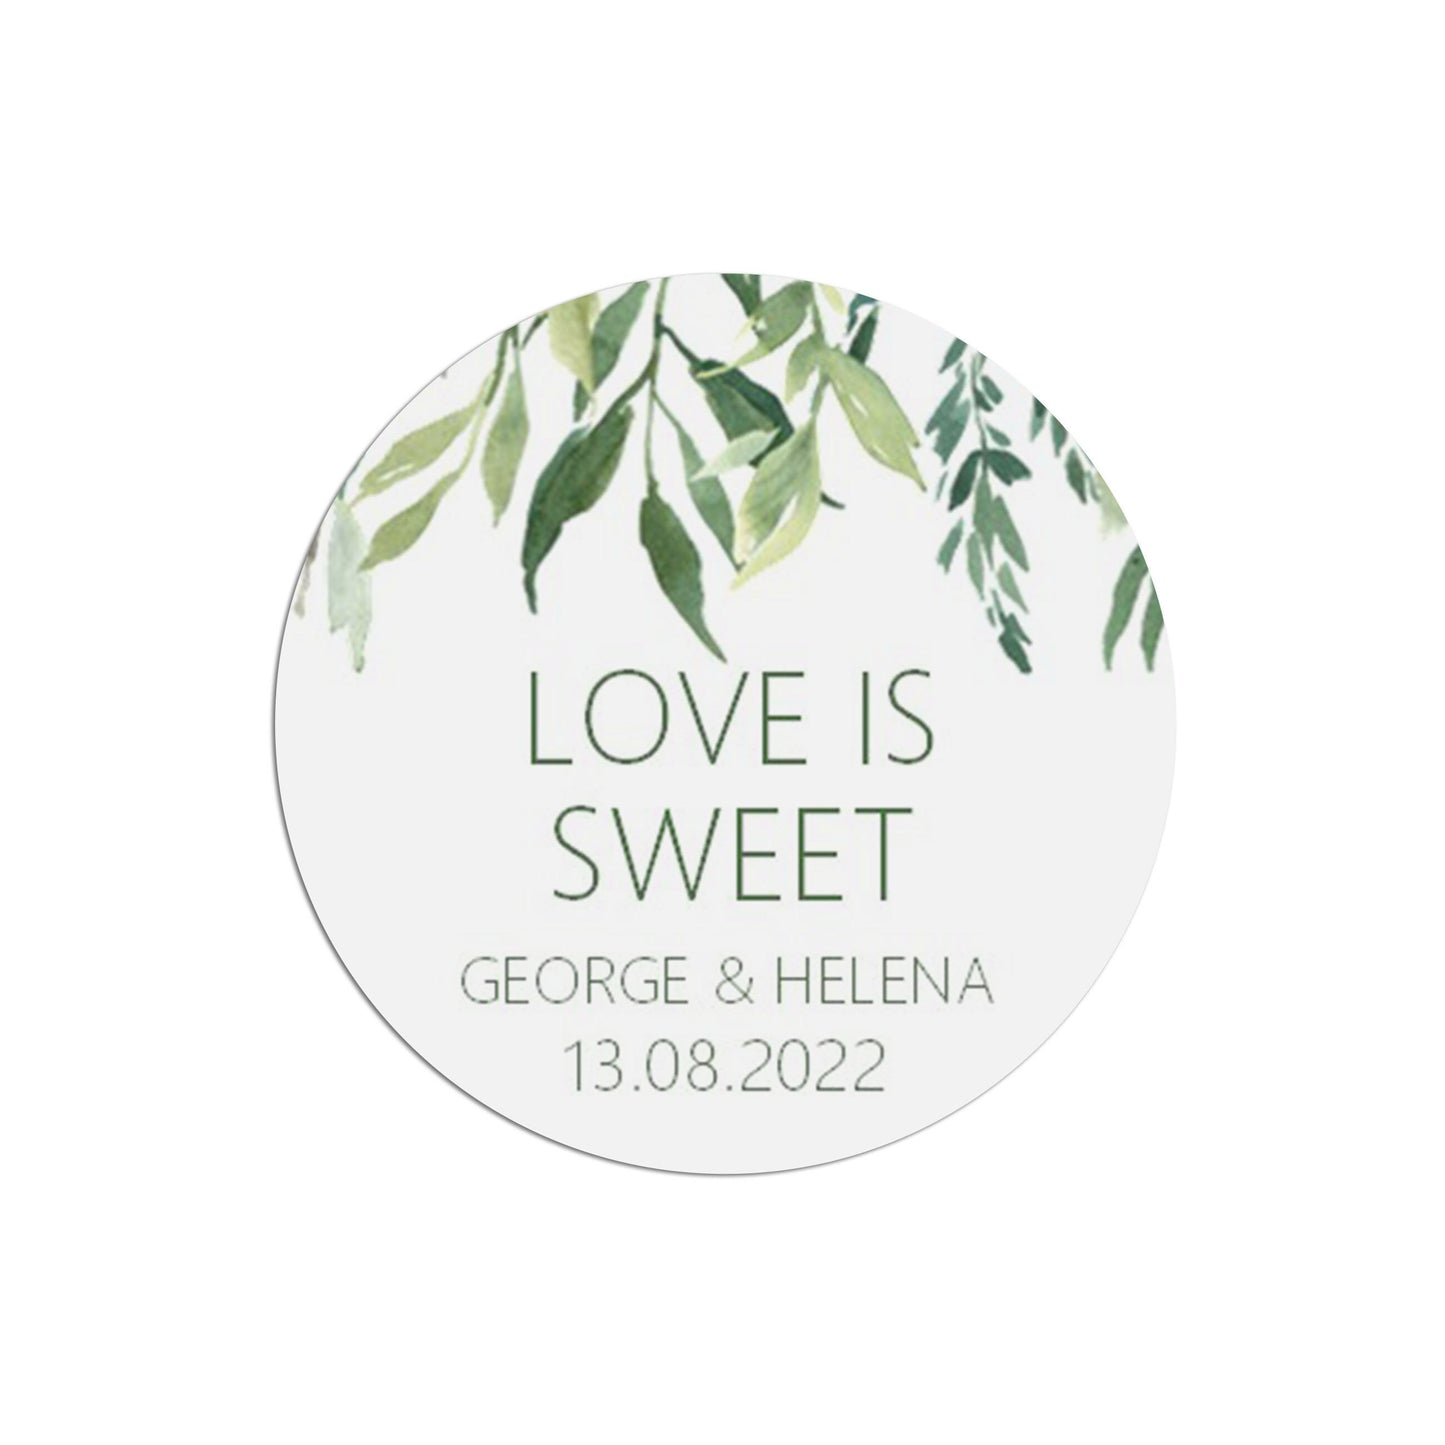 Love Is Sweet Wedding Stickers, Greenery 37mm Round With Personalisation At The Bottom x 35 Stickers Per Sheet